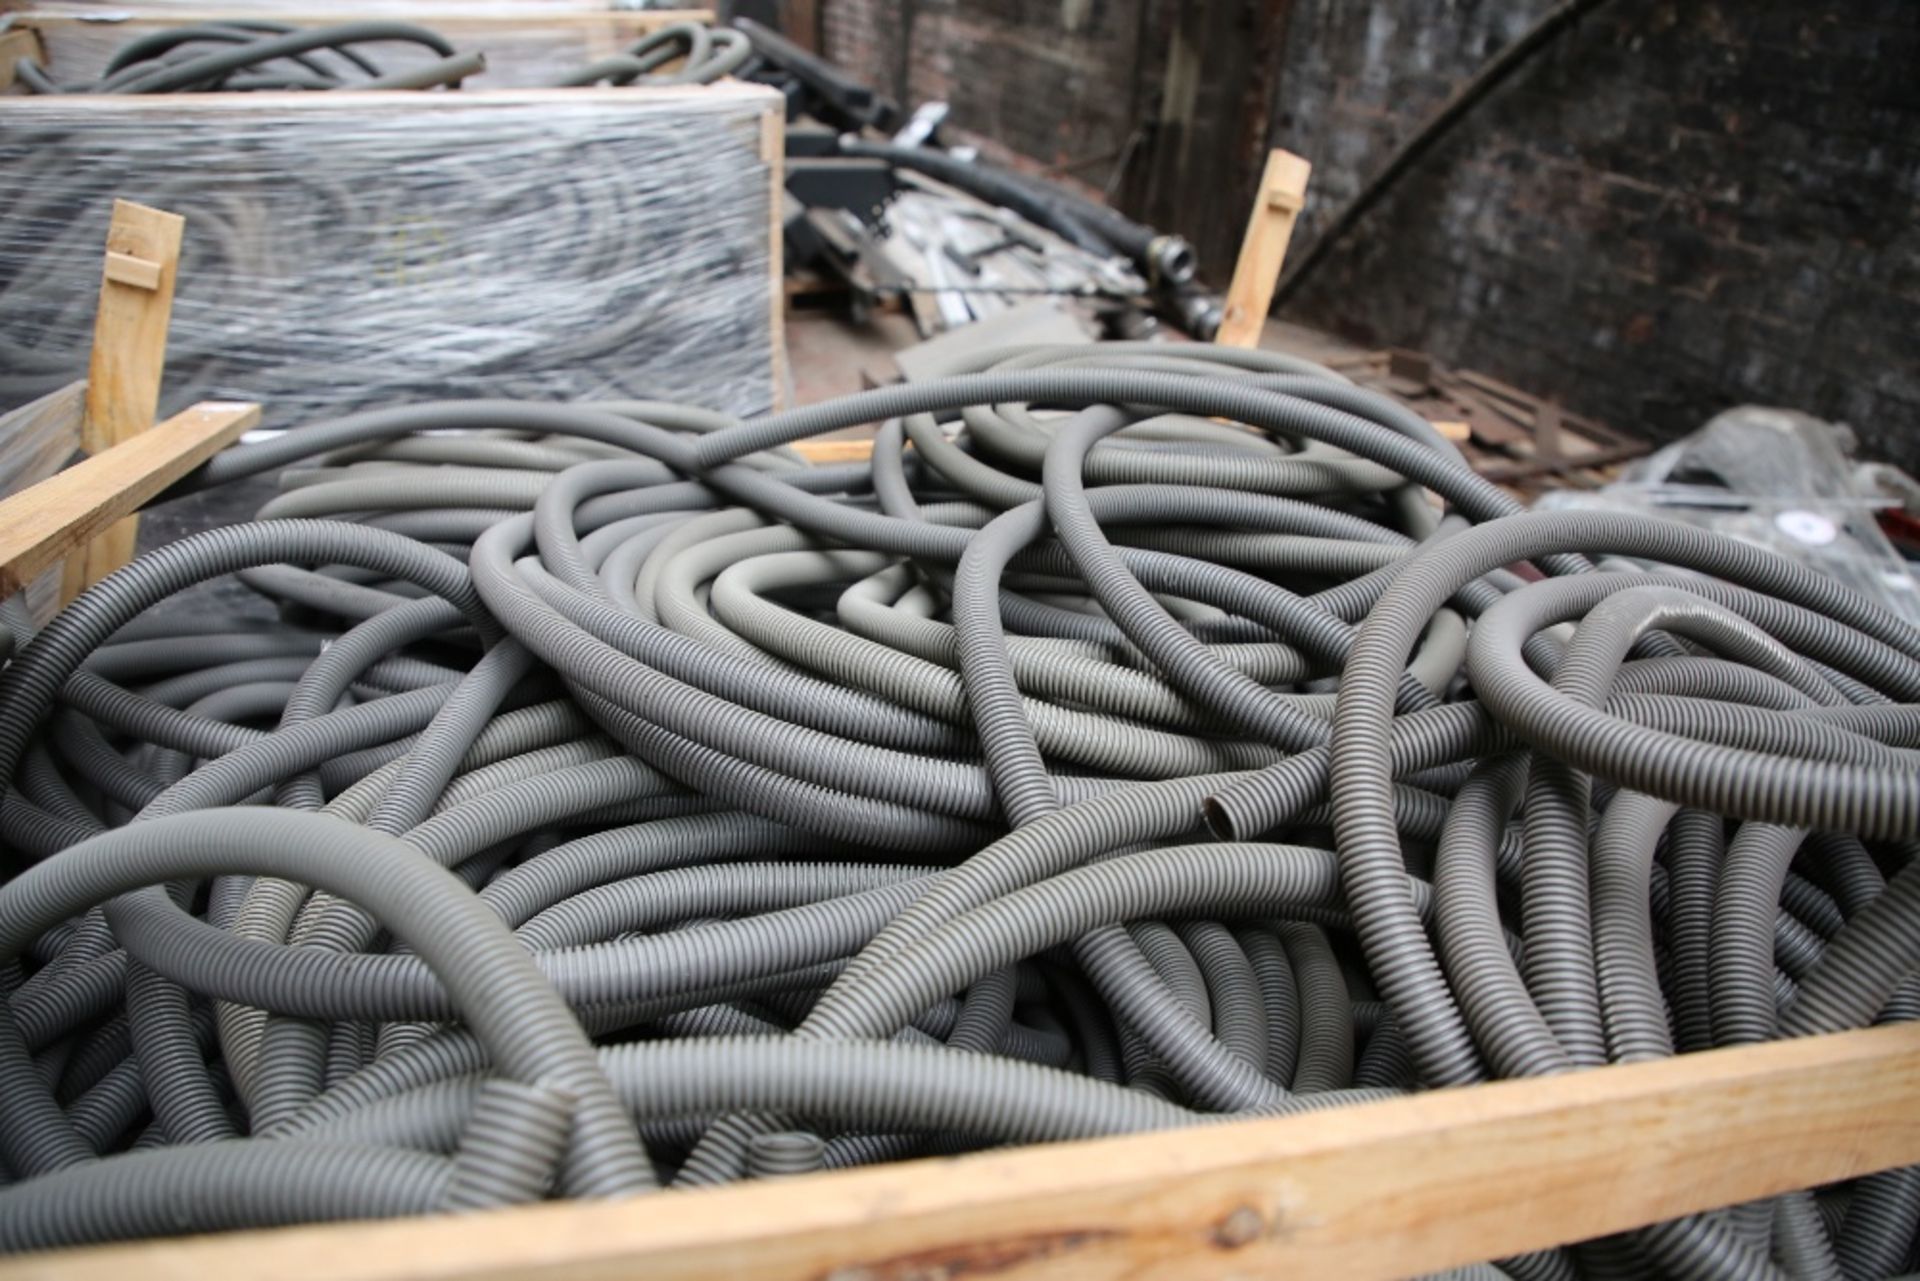 Plastic Cable Ducting / Pipe (1 Pallet) - Image 3 of 3